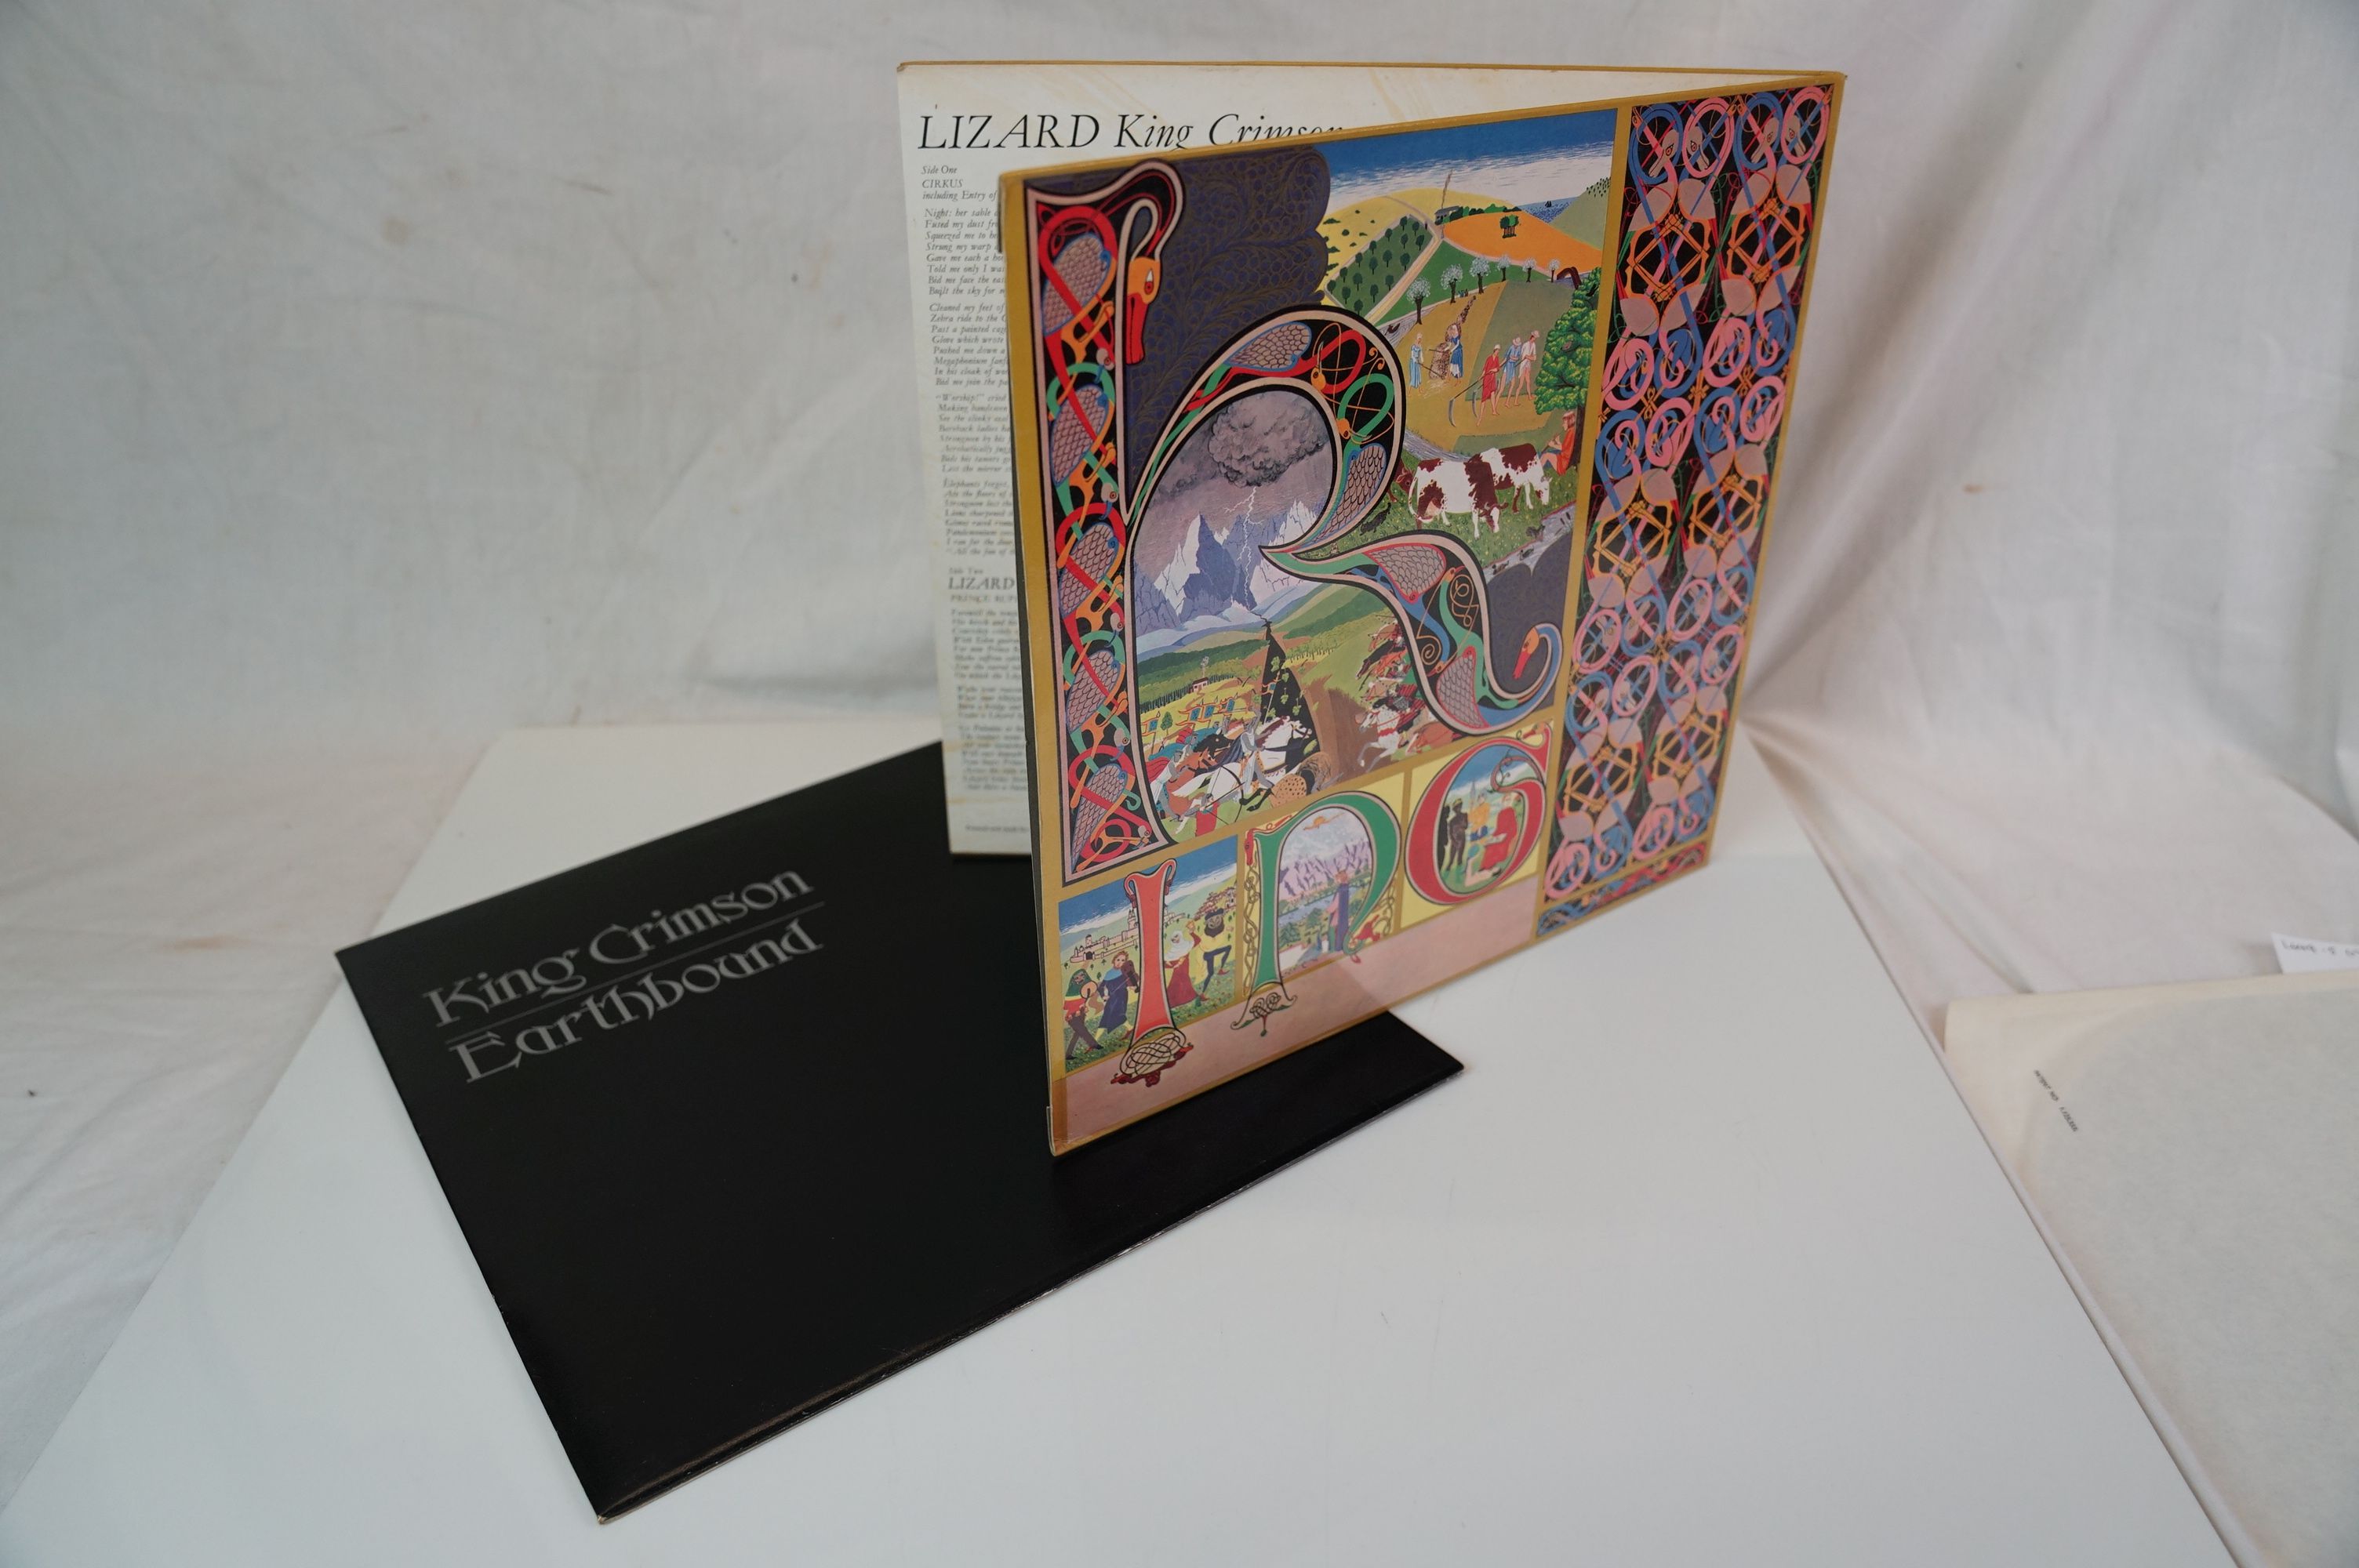 Vinyl - Two King Crimson LPs to include Lizard on Island ILPS9141 laminated gatefiold sleeve and